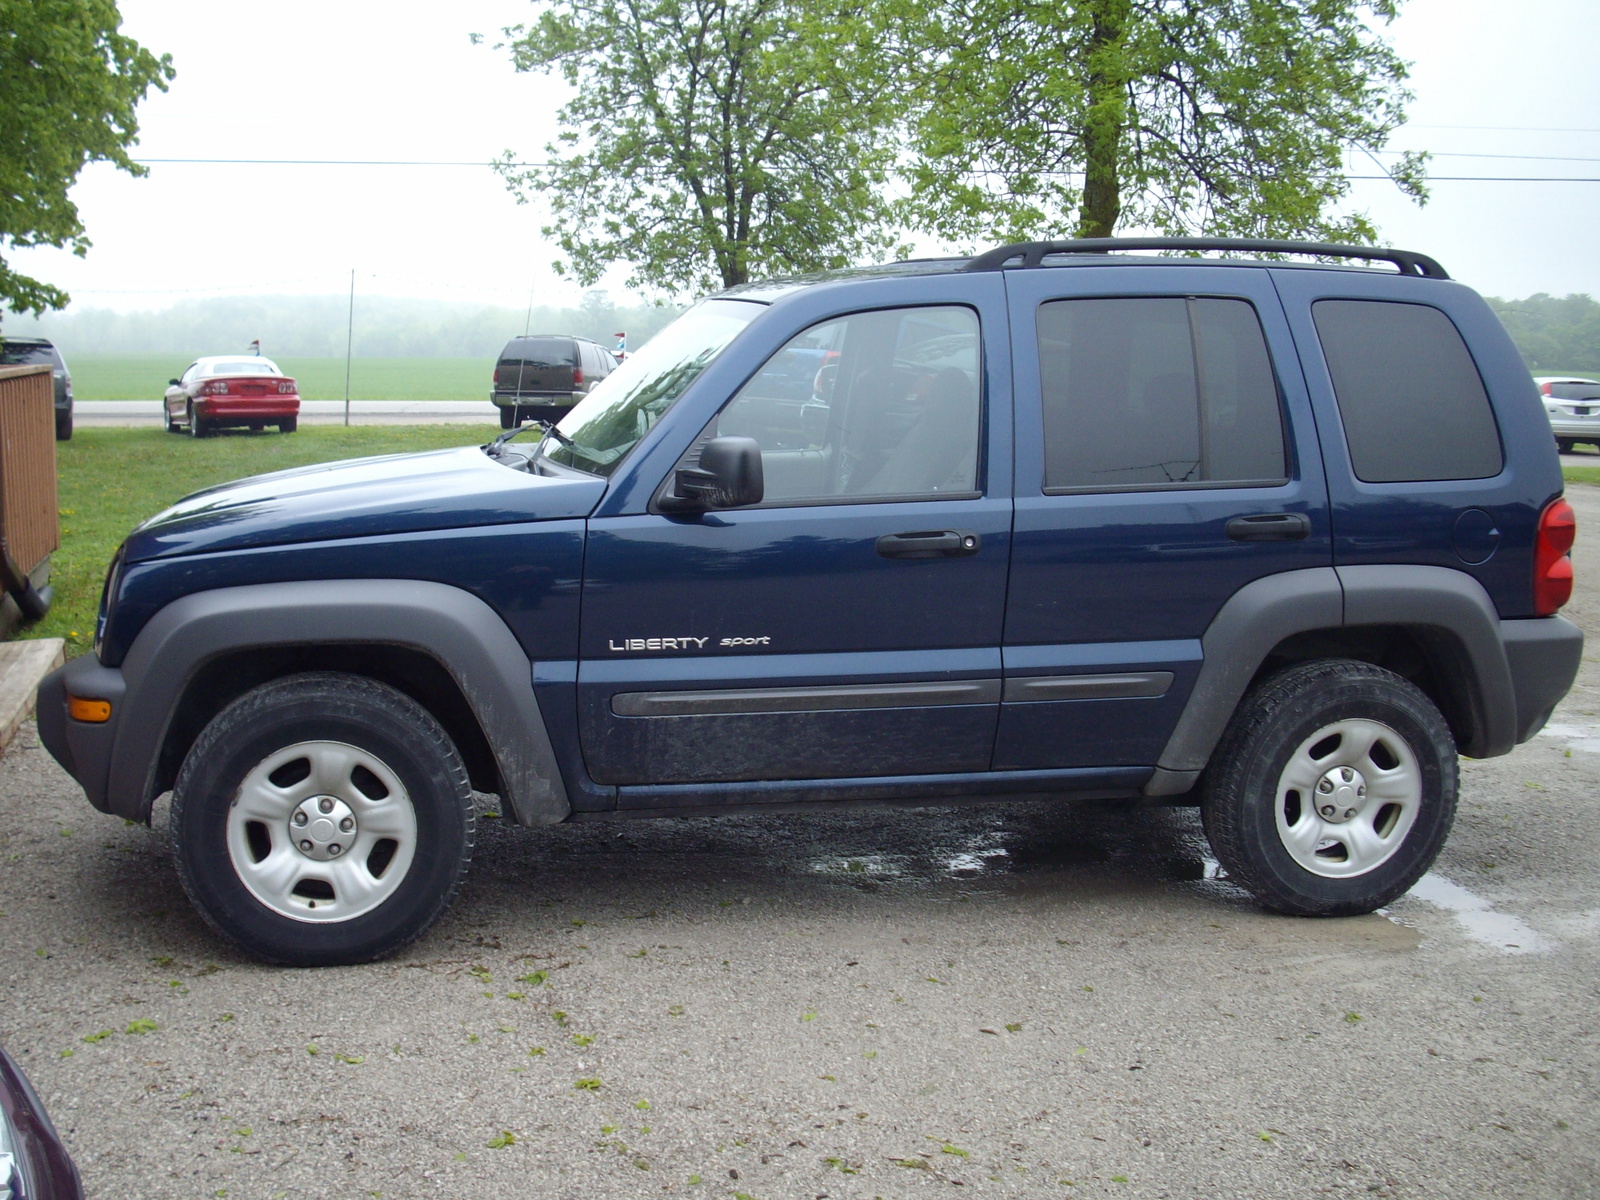 2003 Jeep liberty sport safety ratings #1